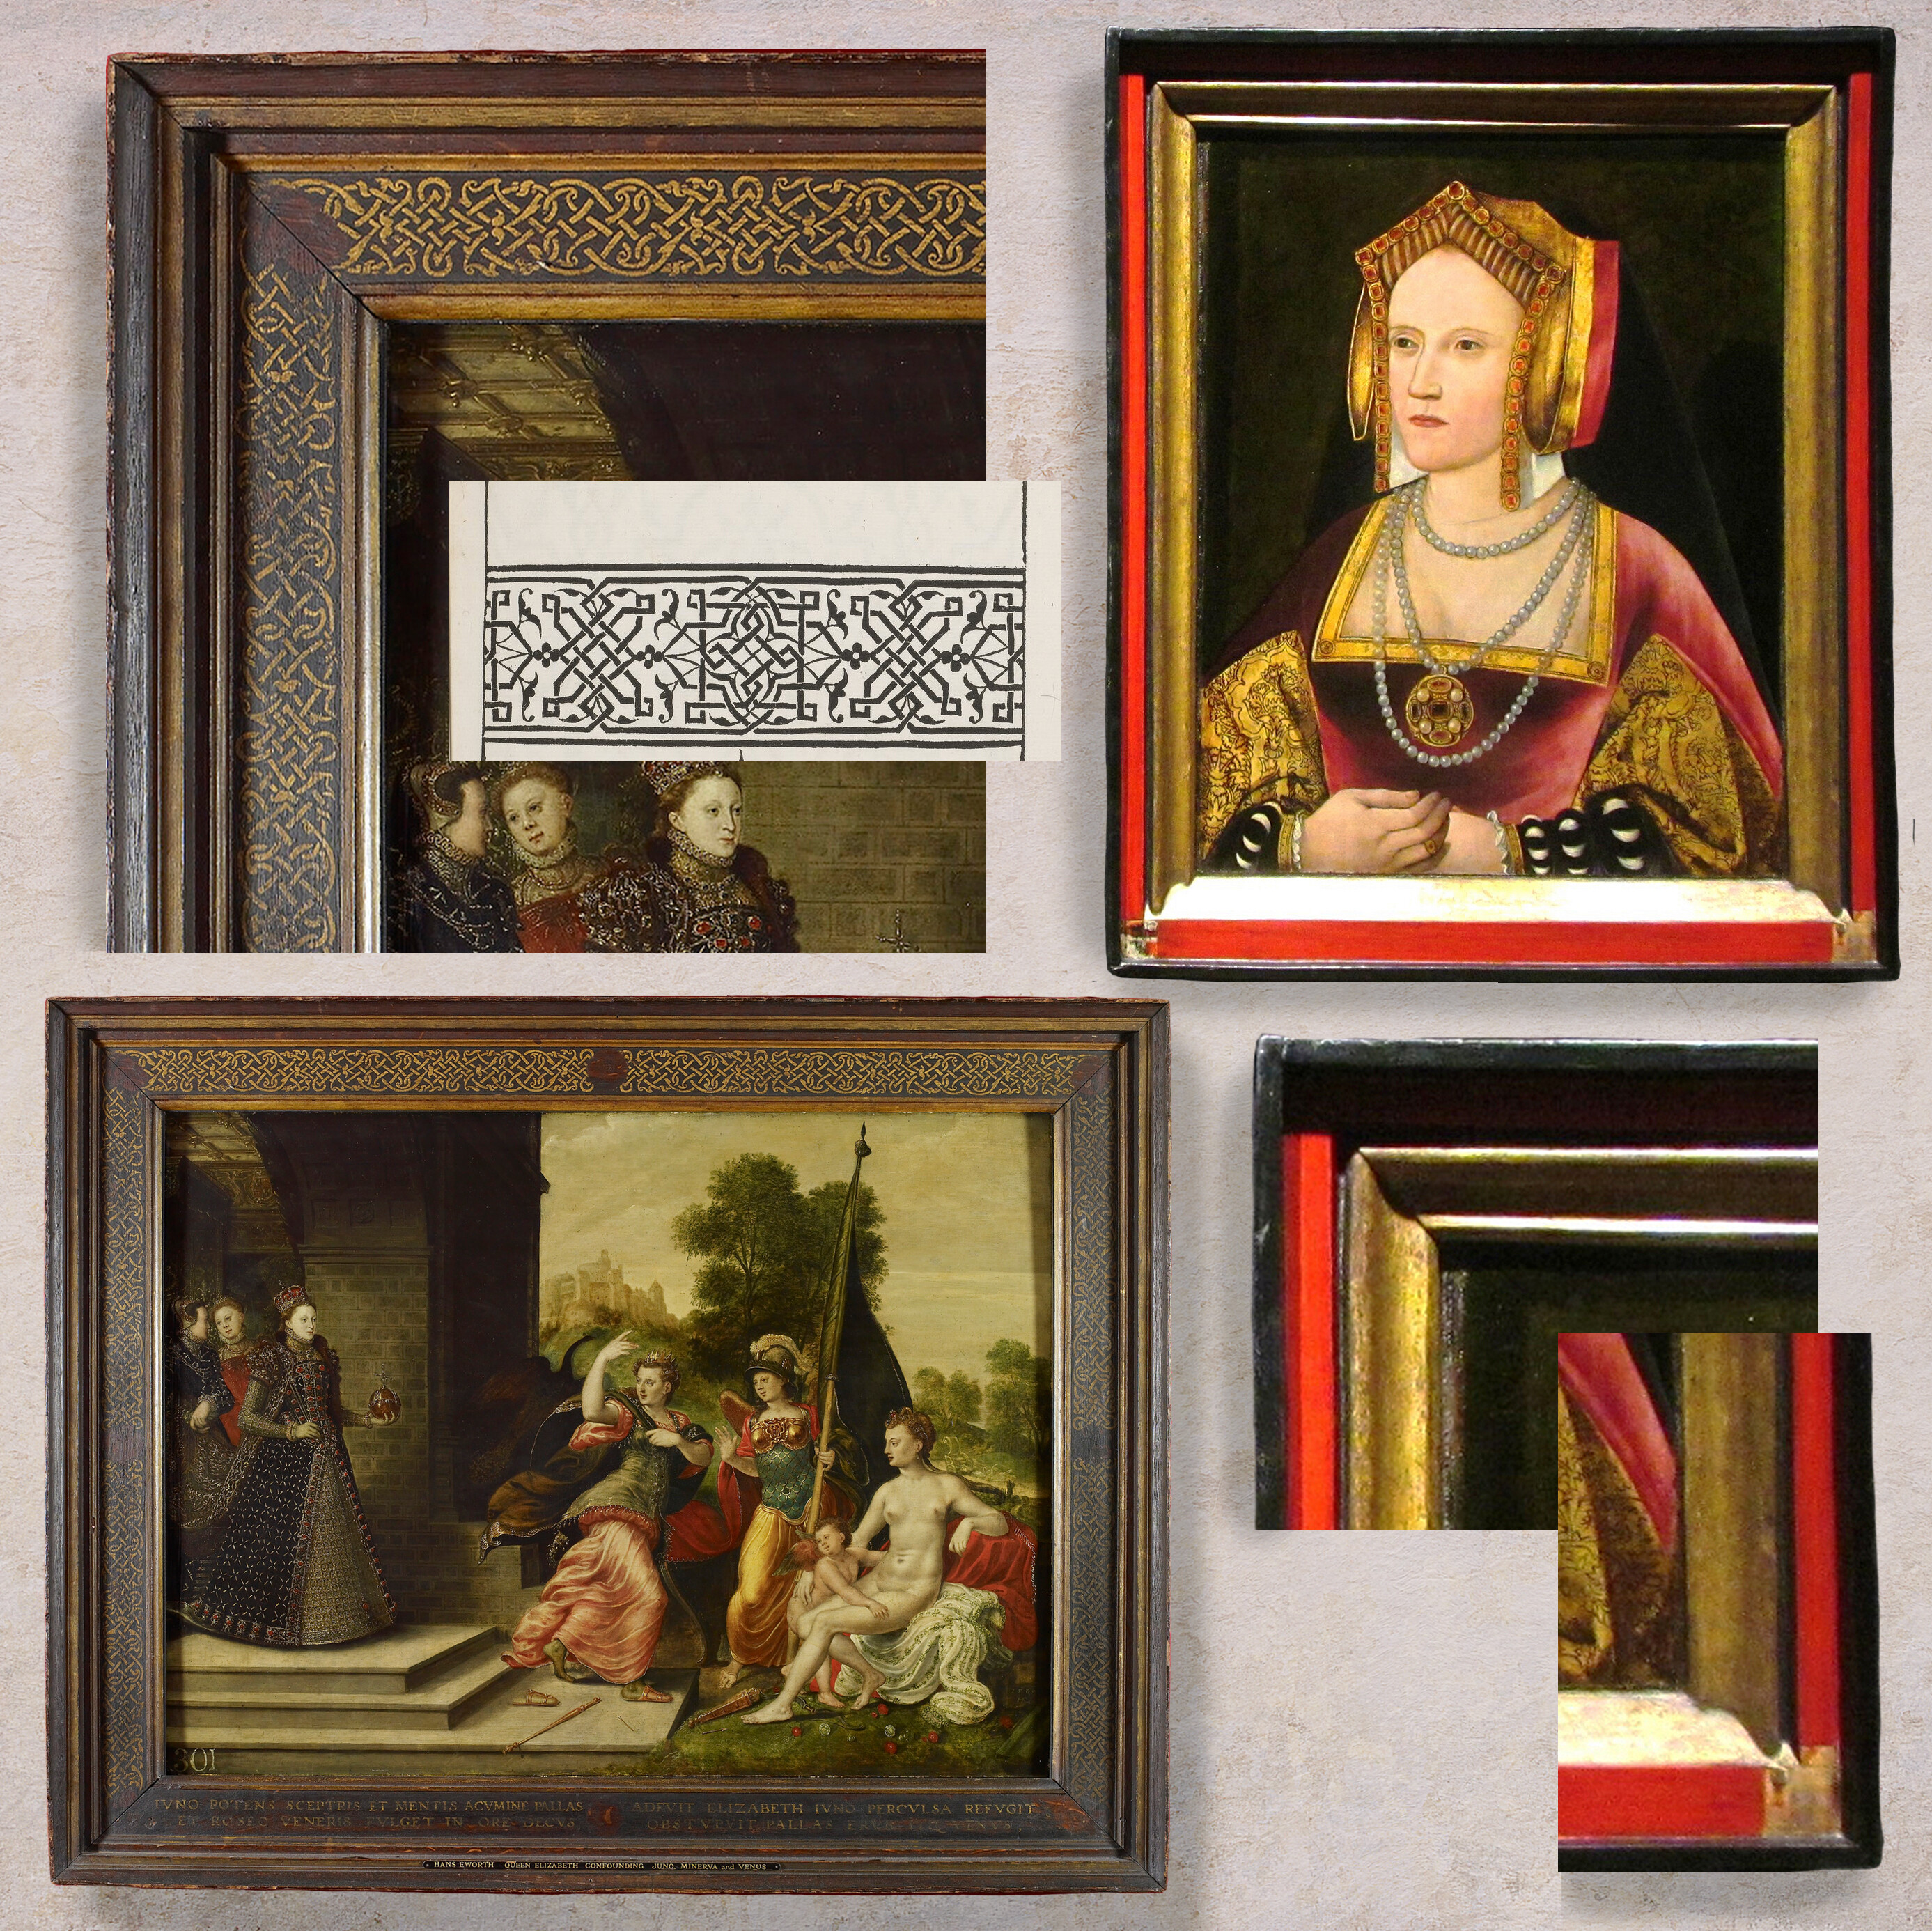 Frames in the Royal Collection